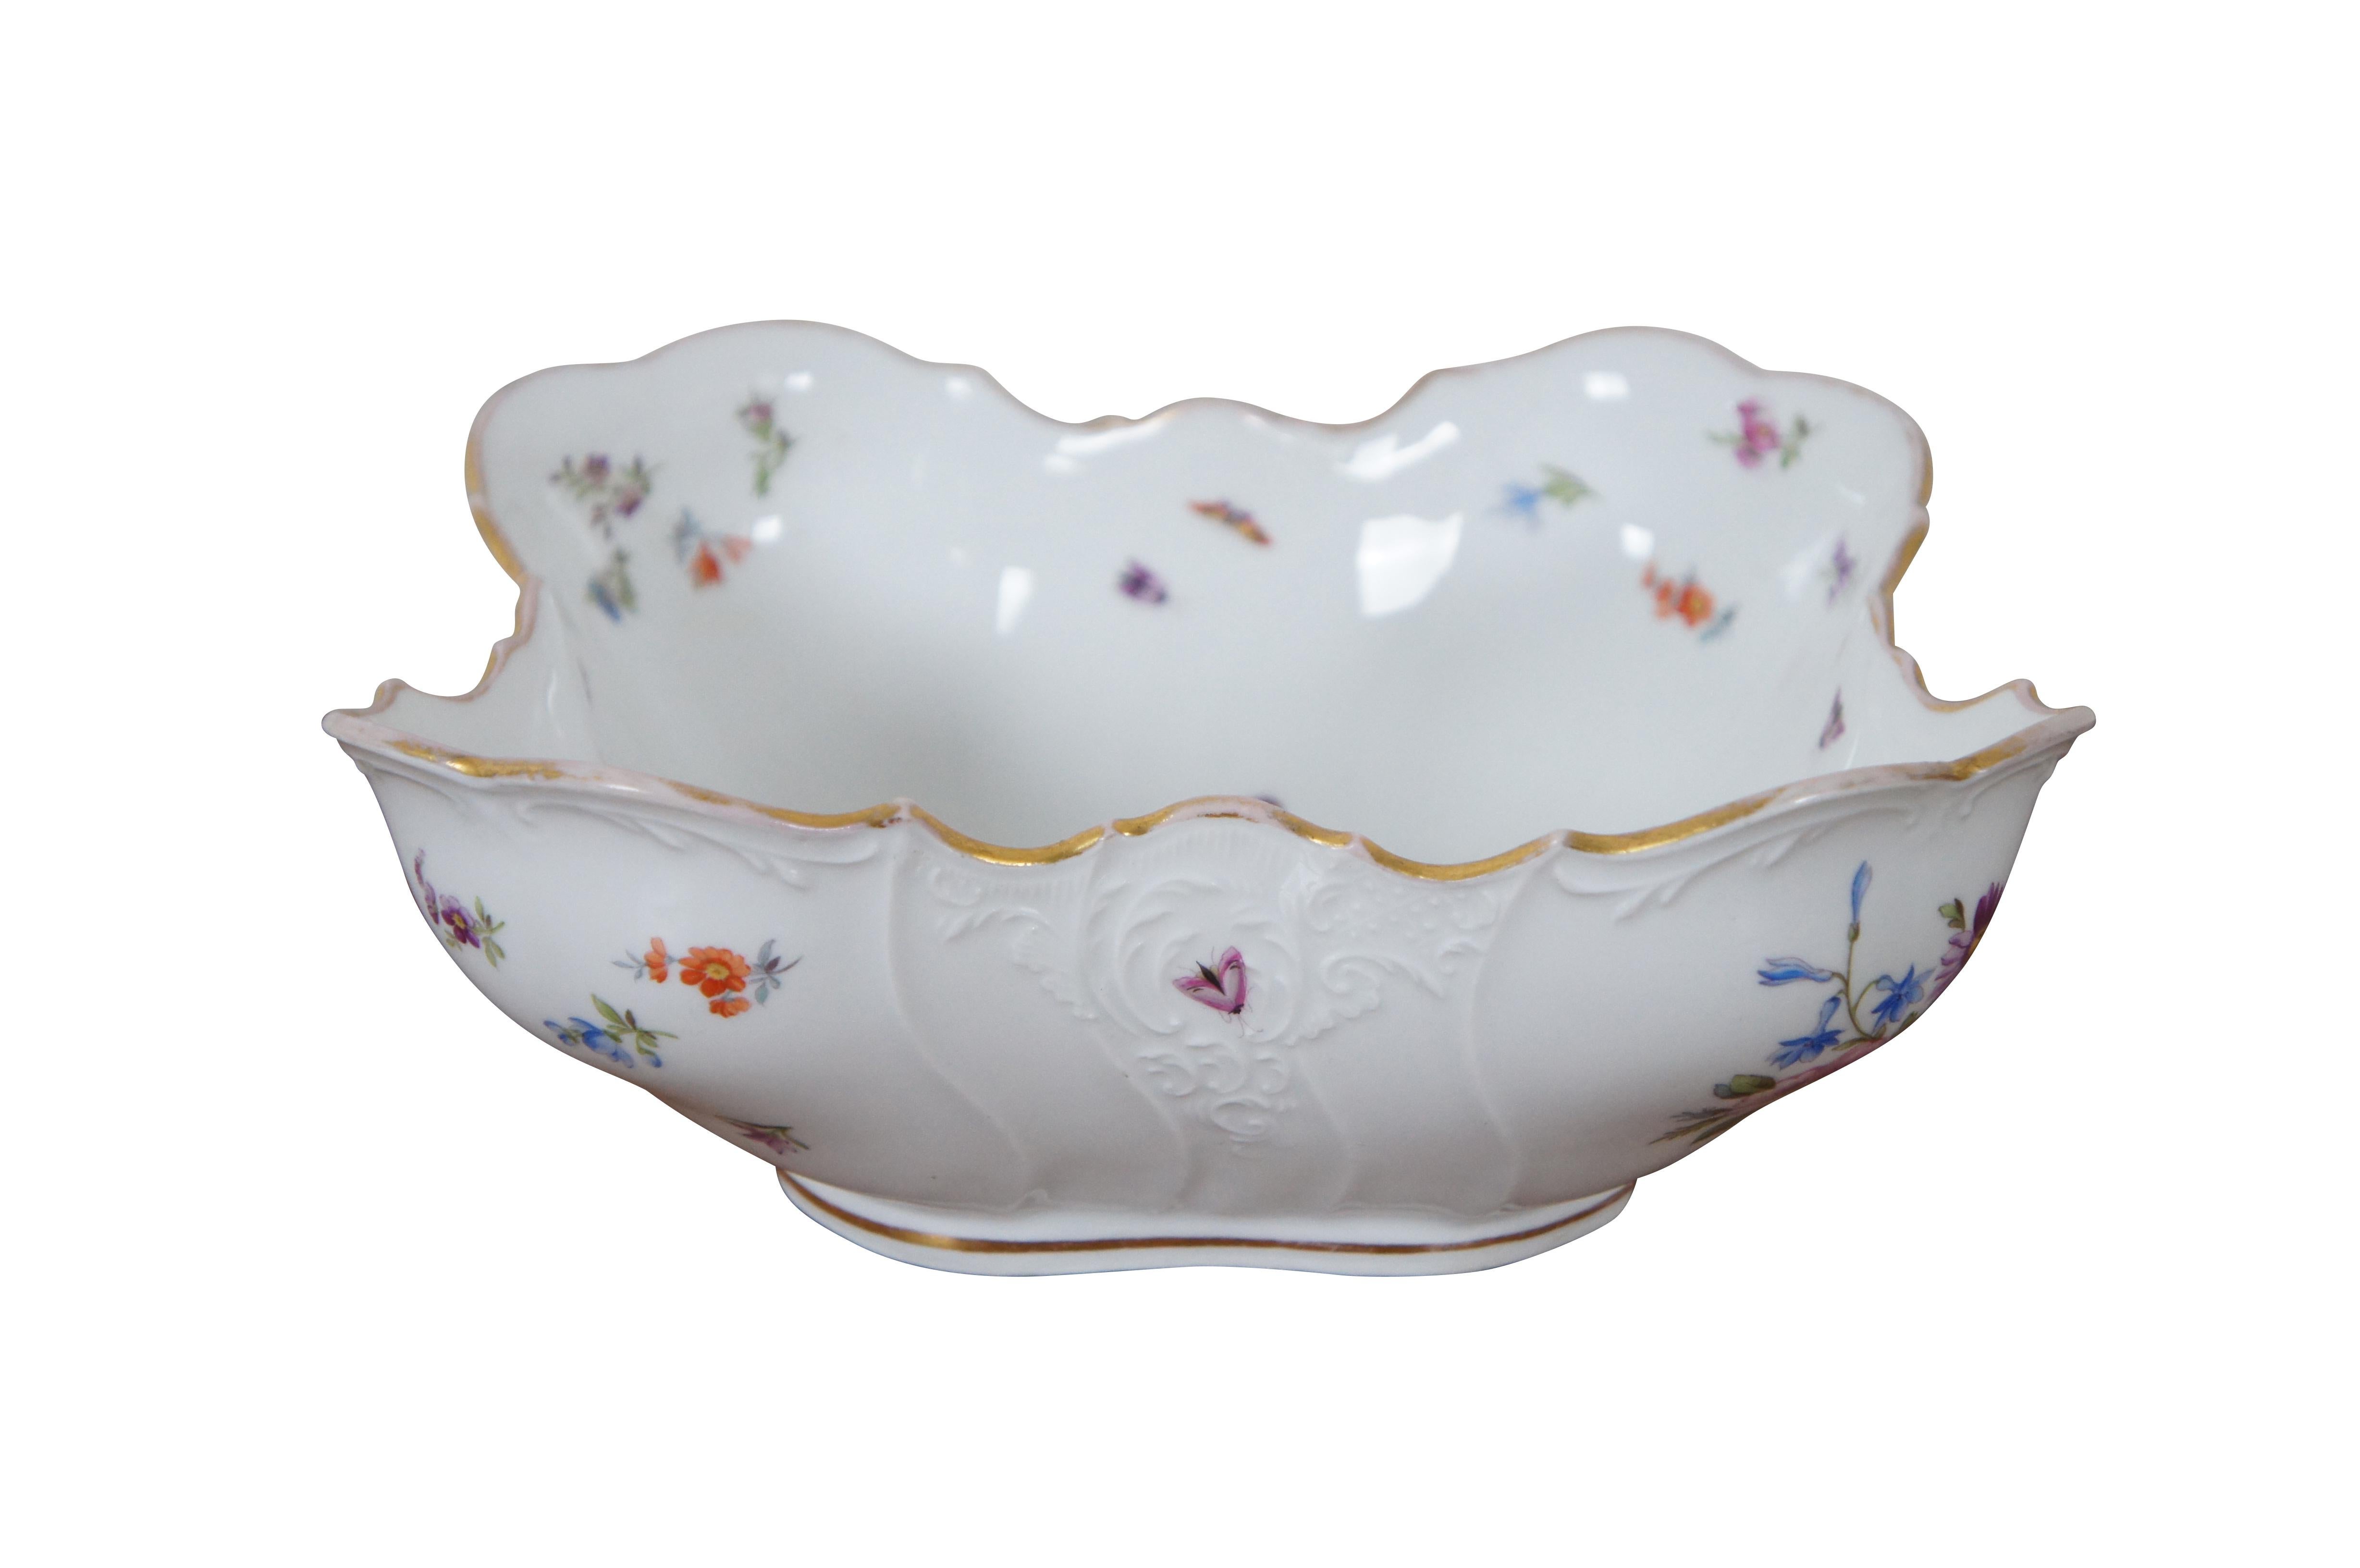 Antique German Dresden porcelain serving bowl or compote featuring square form with serpentine ruffled edge design, gold trim, flowers and insects (butterflies, ladybugs, moths).


DIMENSIONS
9” x 8.5” x 3.5” (Width x Depth x Height)